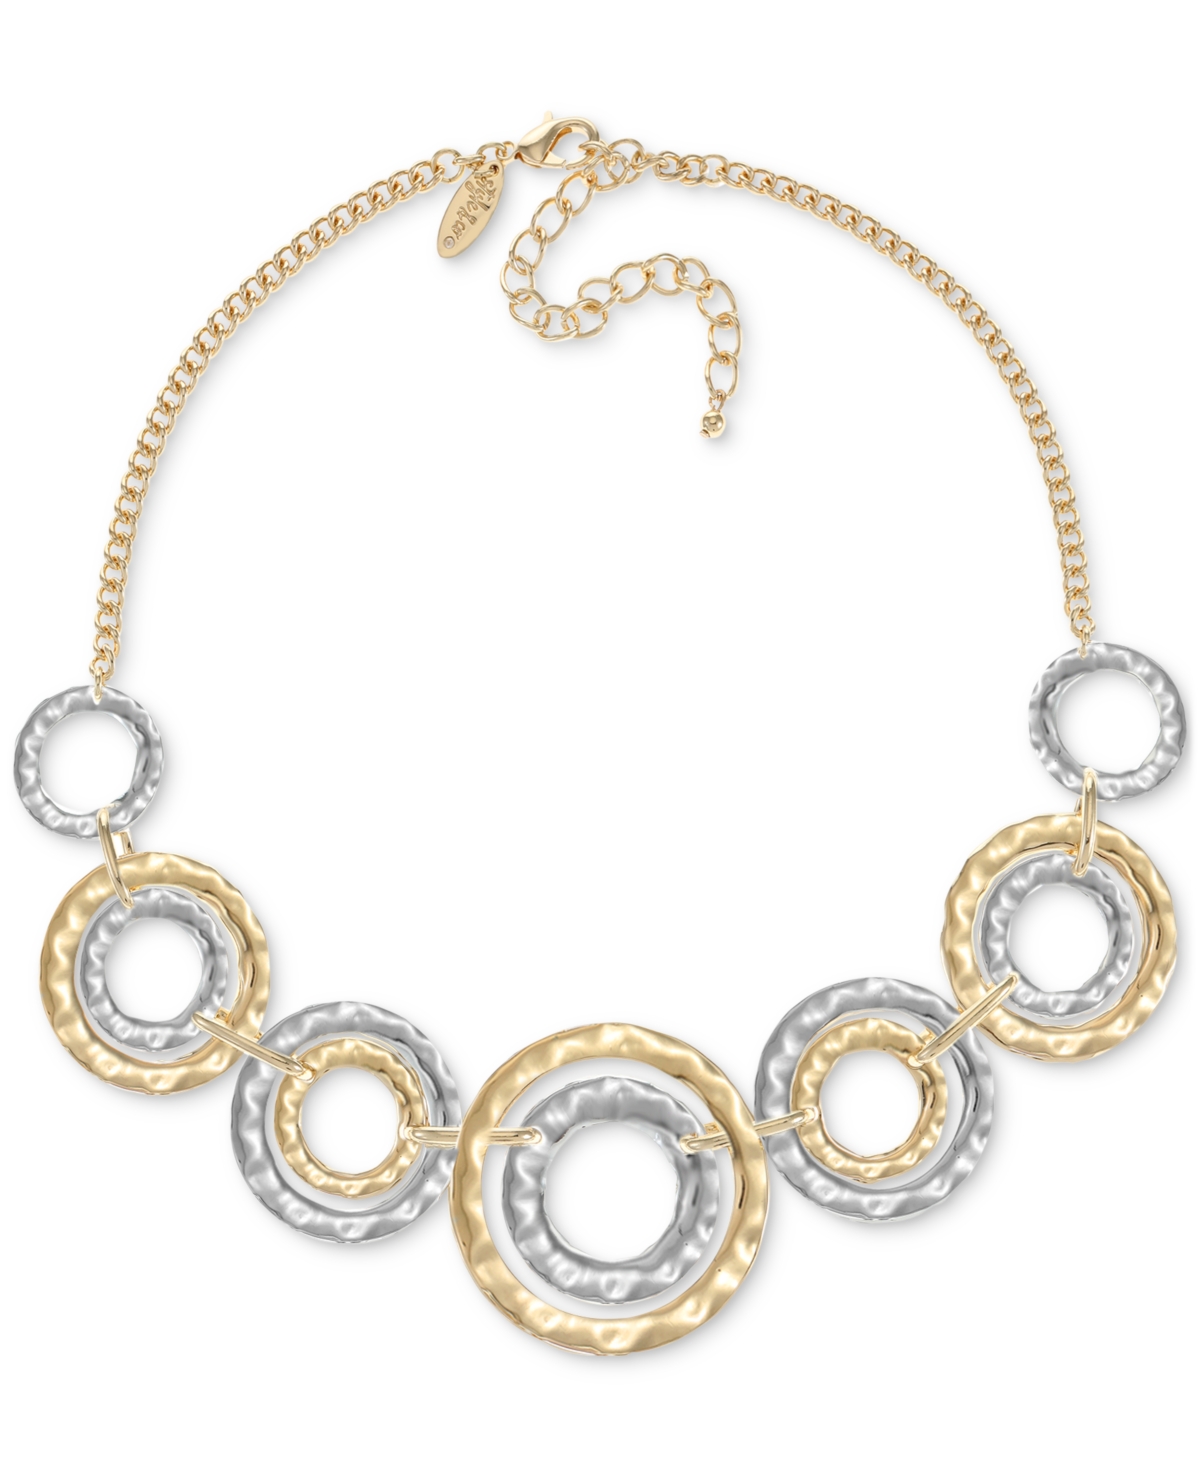 Two-Tone Hammered Link Statement Necklace, 18" + 3" extender, Created for Macy's - Two Tone